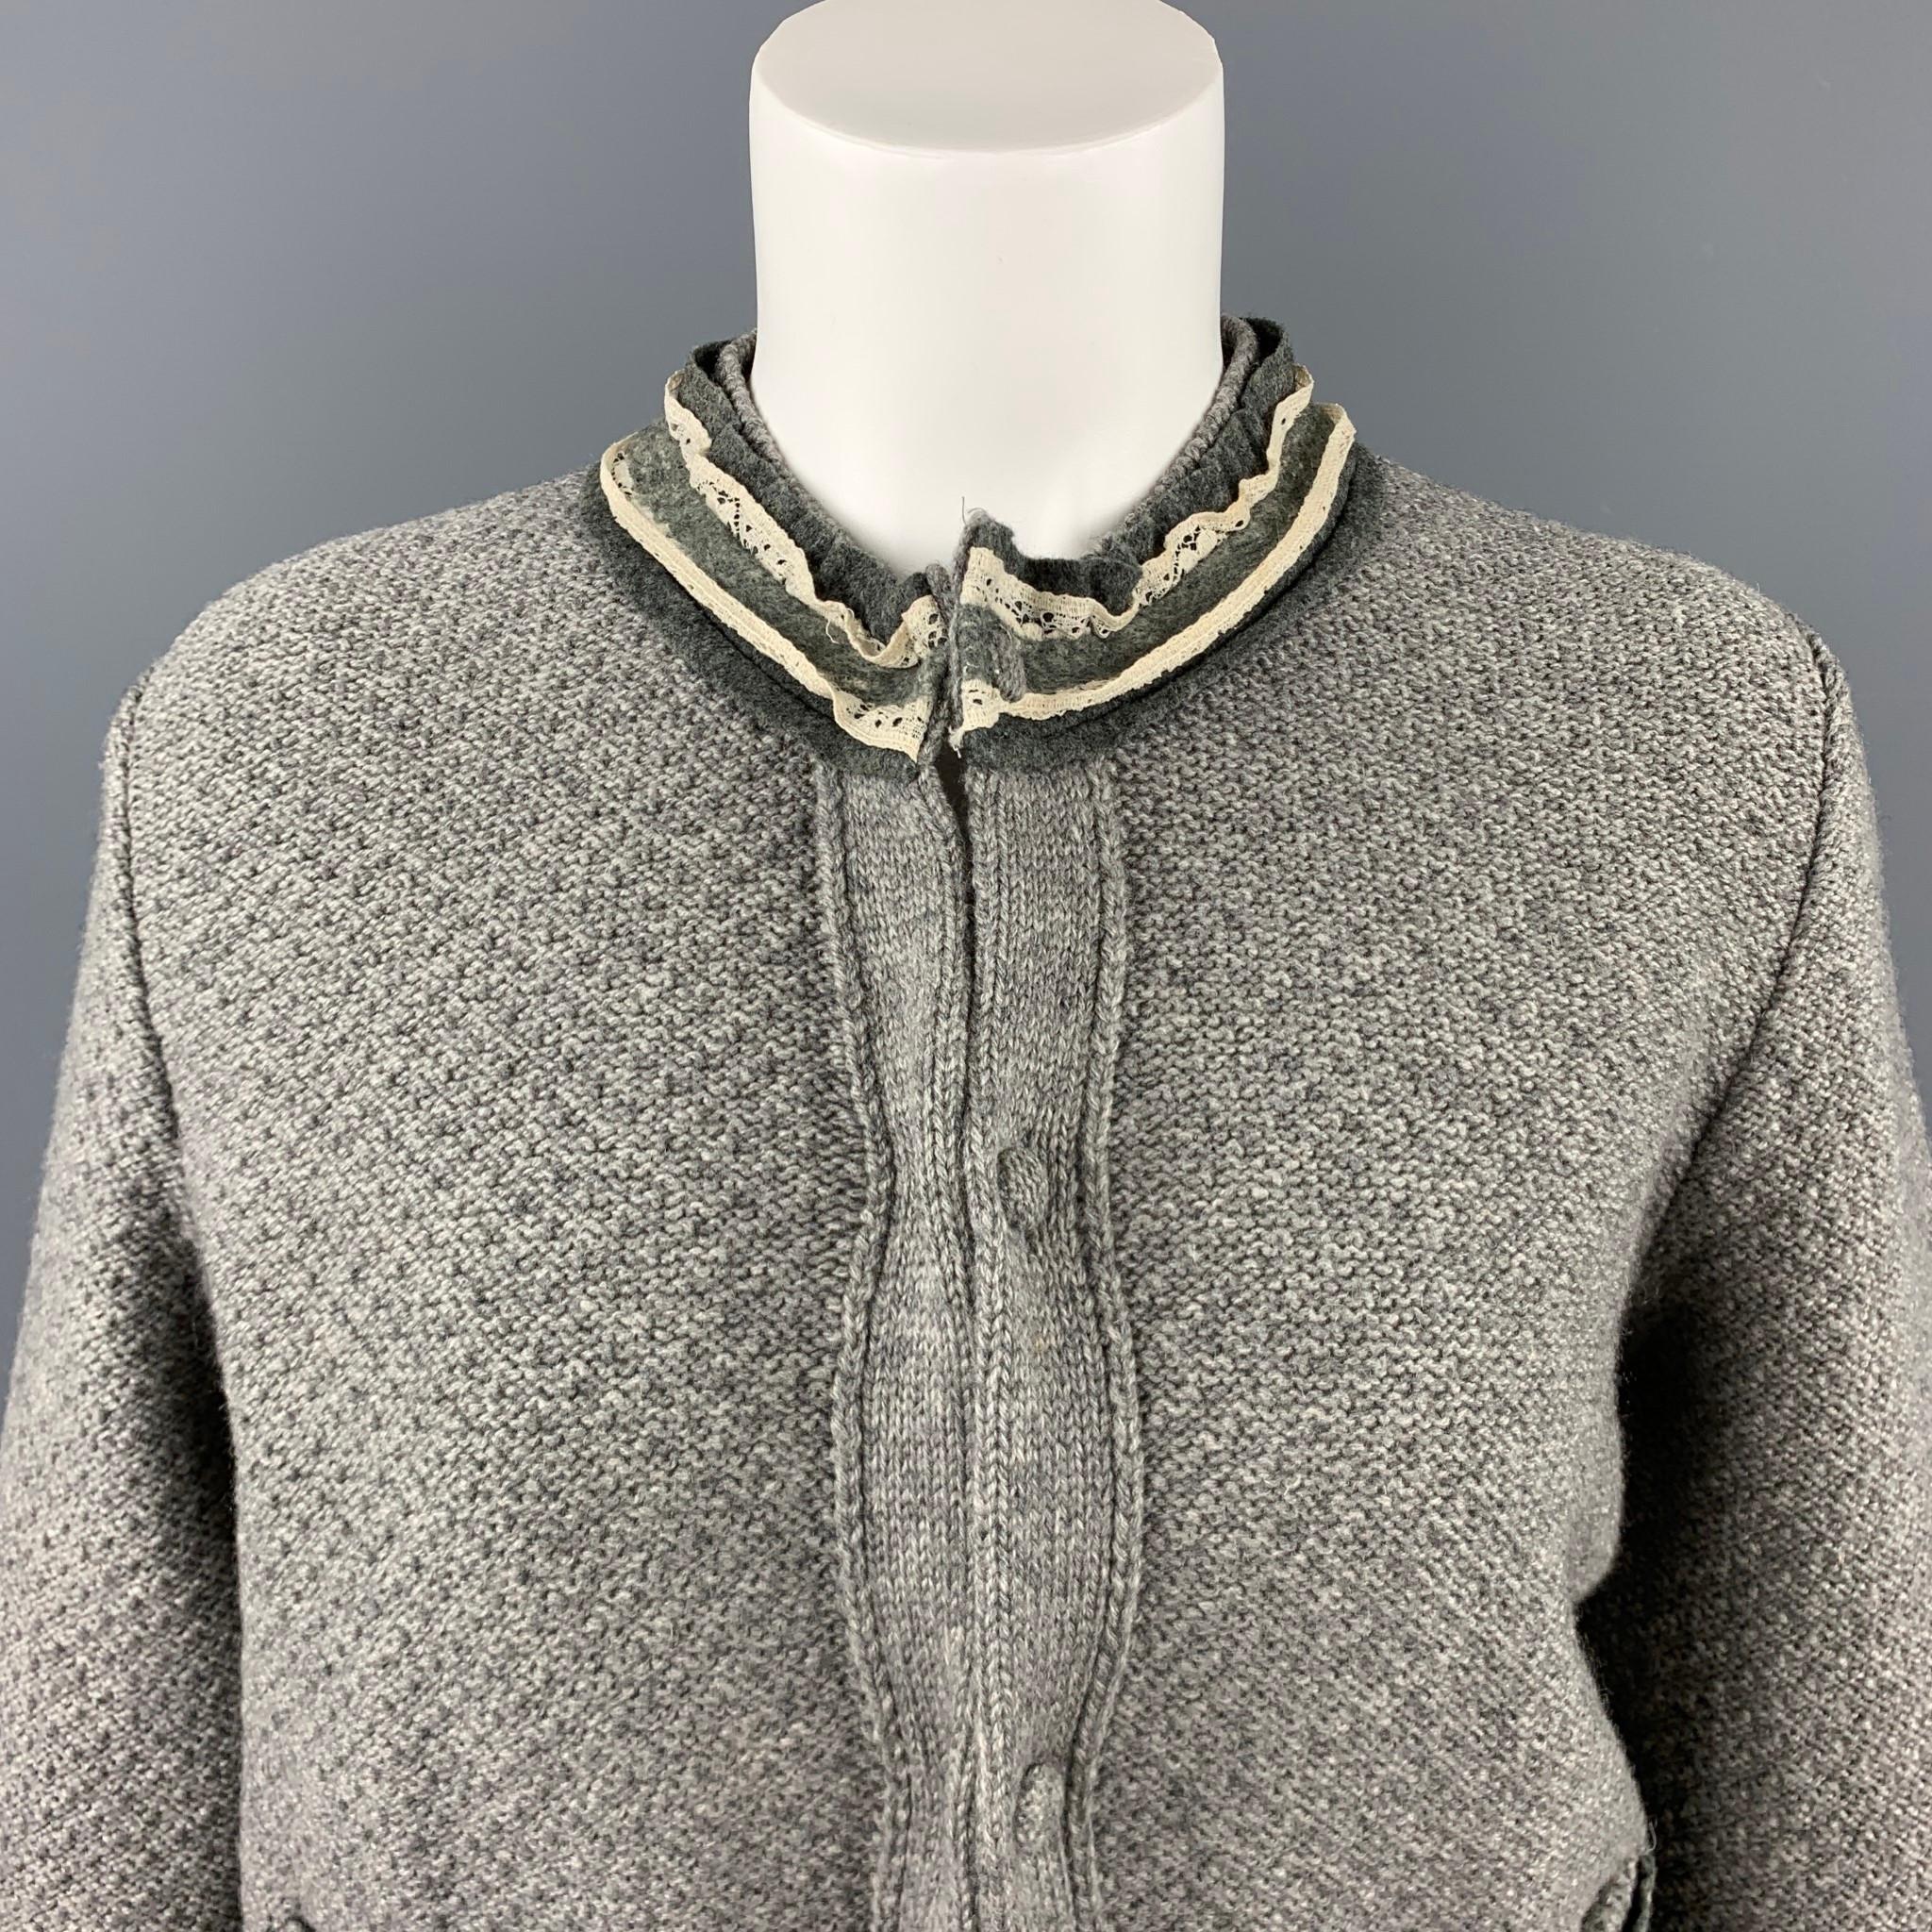 FENDI cardigan comes in a gray knitted wool featuring 3/4 sleeves, crew-neck with trimmed ruffles, patch pockets, and a hidden button closure. Made in Italy.

Excellent Pre-Owned Condition.
Marked: IT 40

Measurements:

Shoulder: 15 in.
Bust: 42